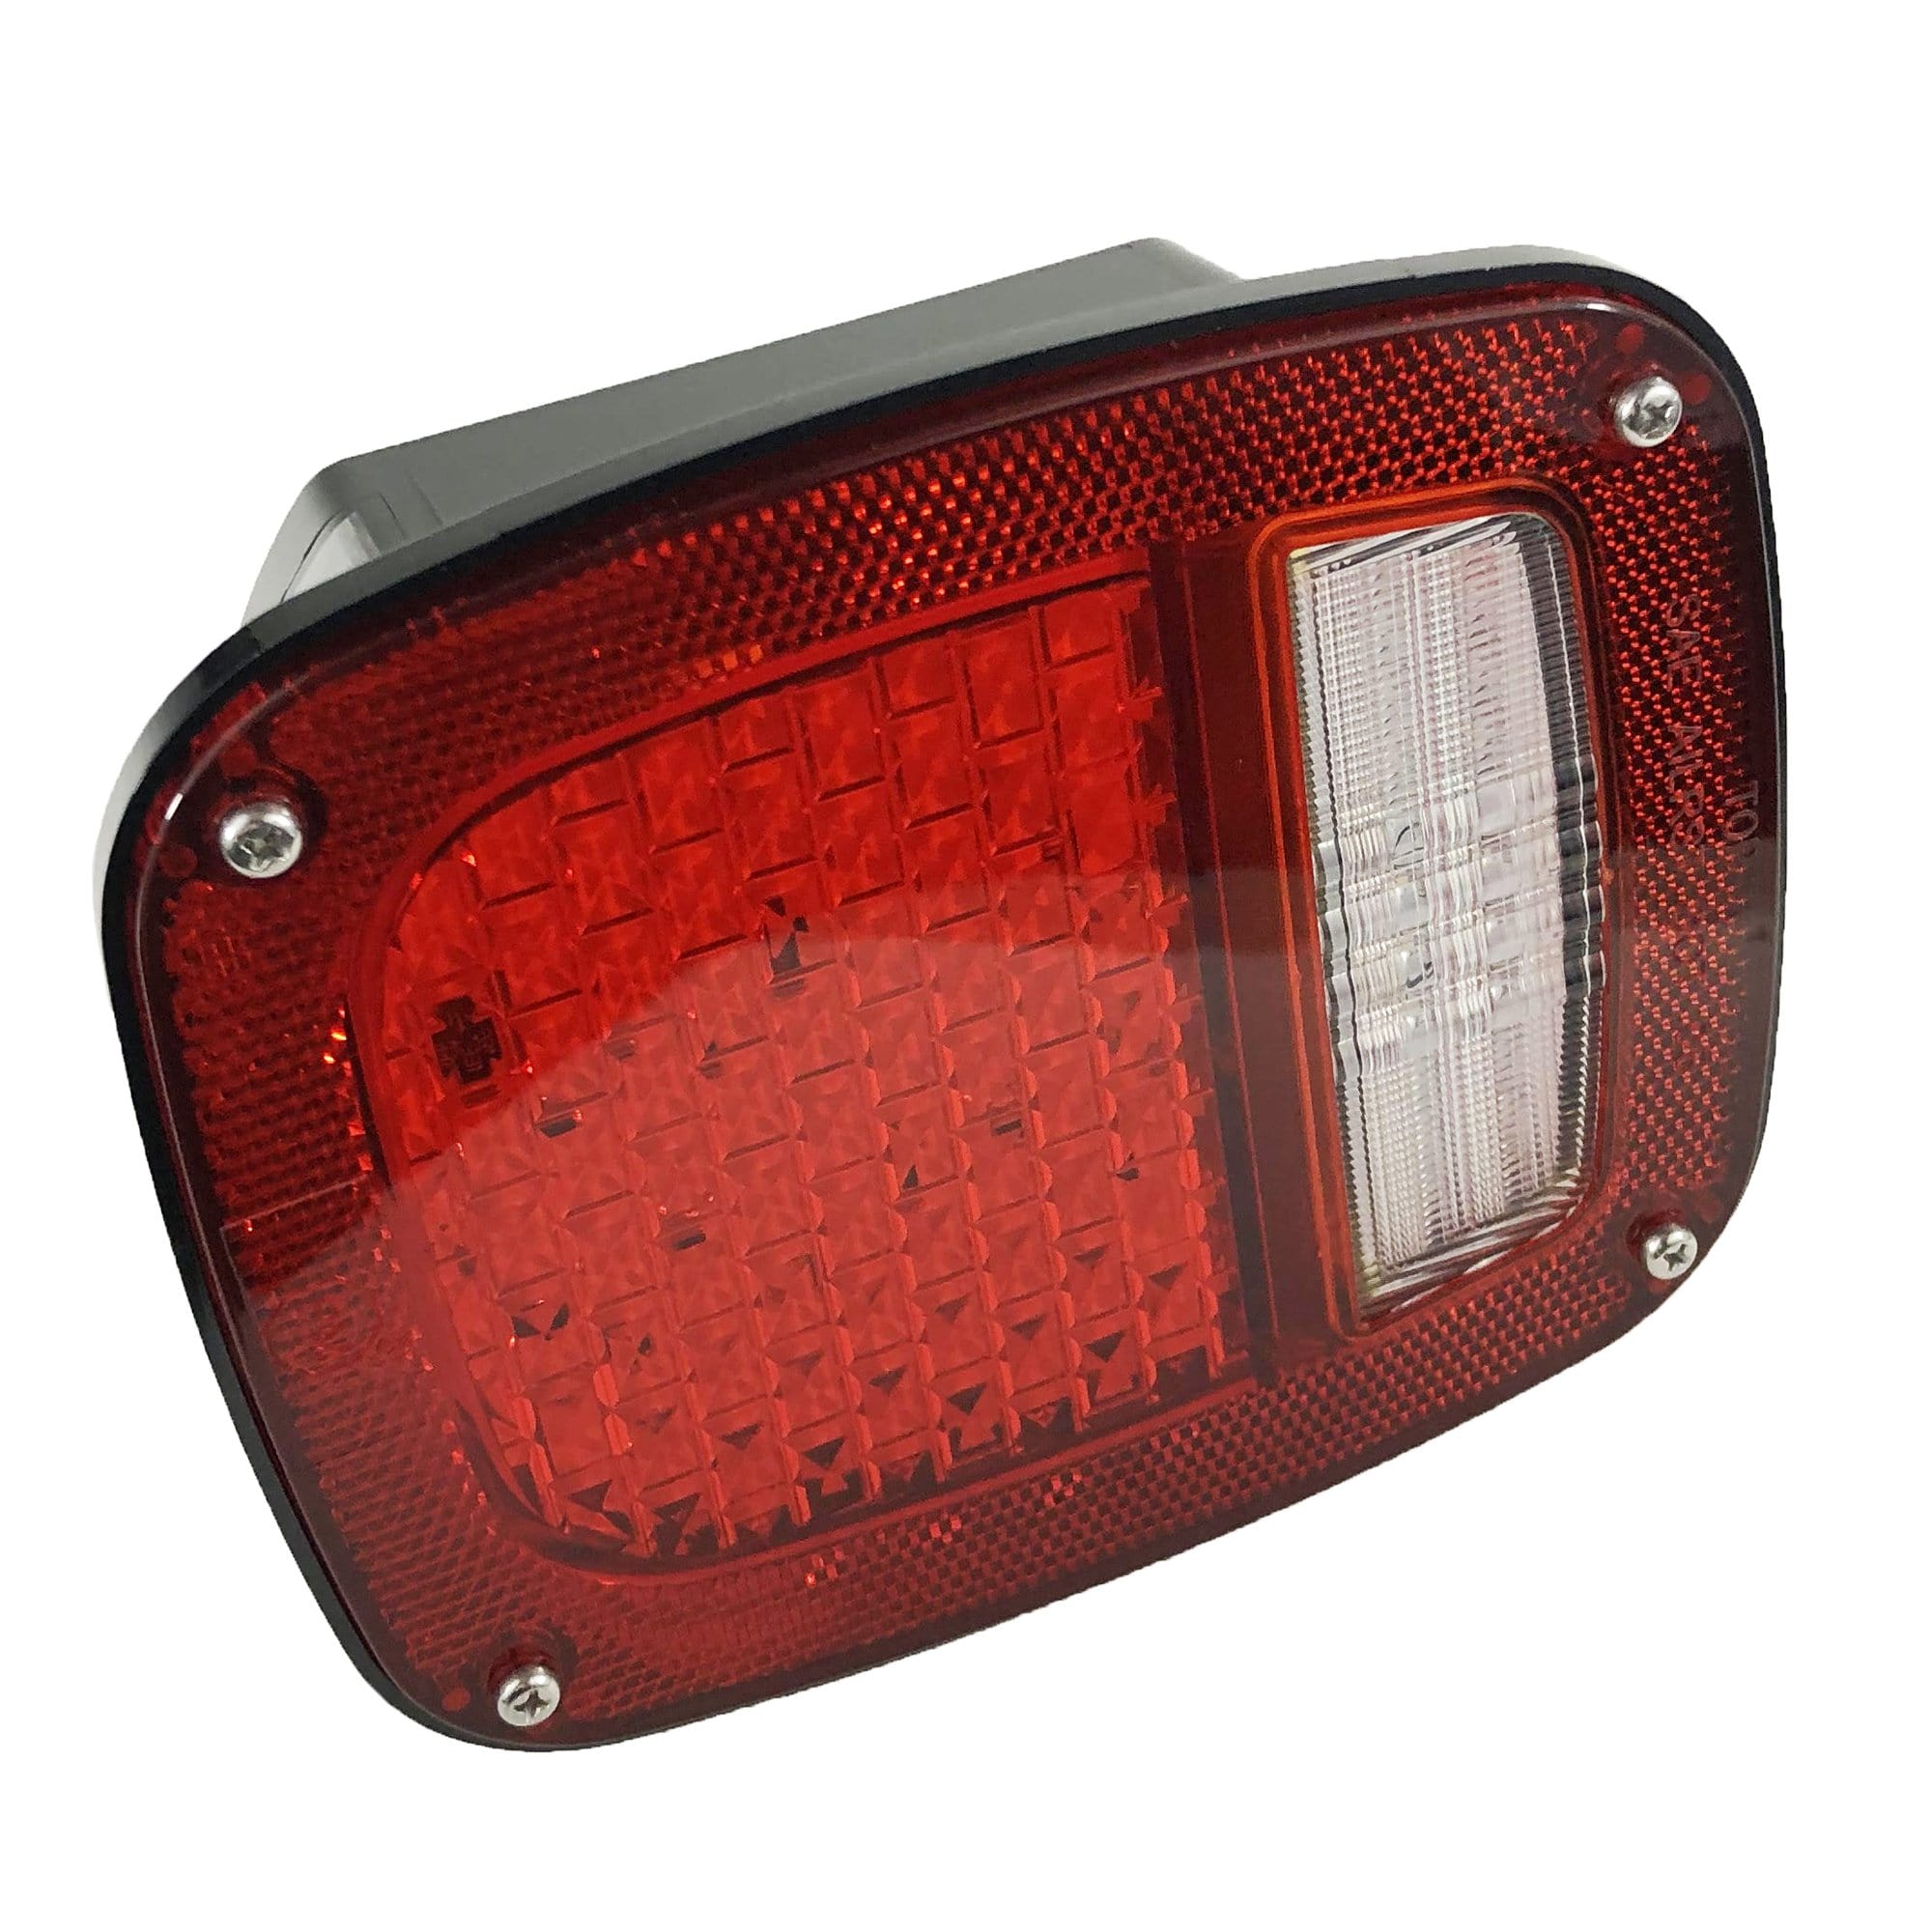 Anderson Marine / Peterson MFG 845L 6.76" Red Rectangular LED Rear Combination Light